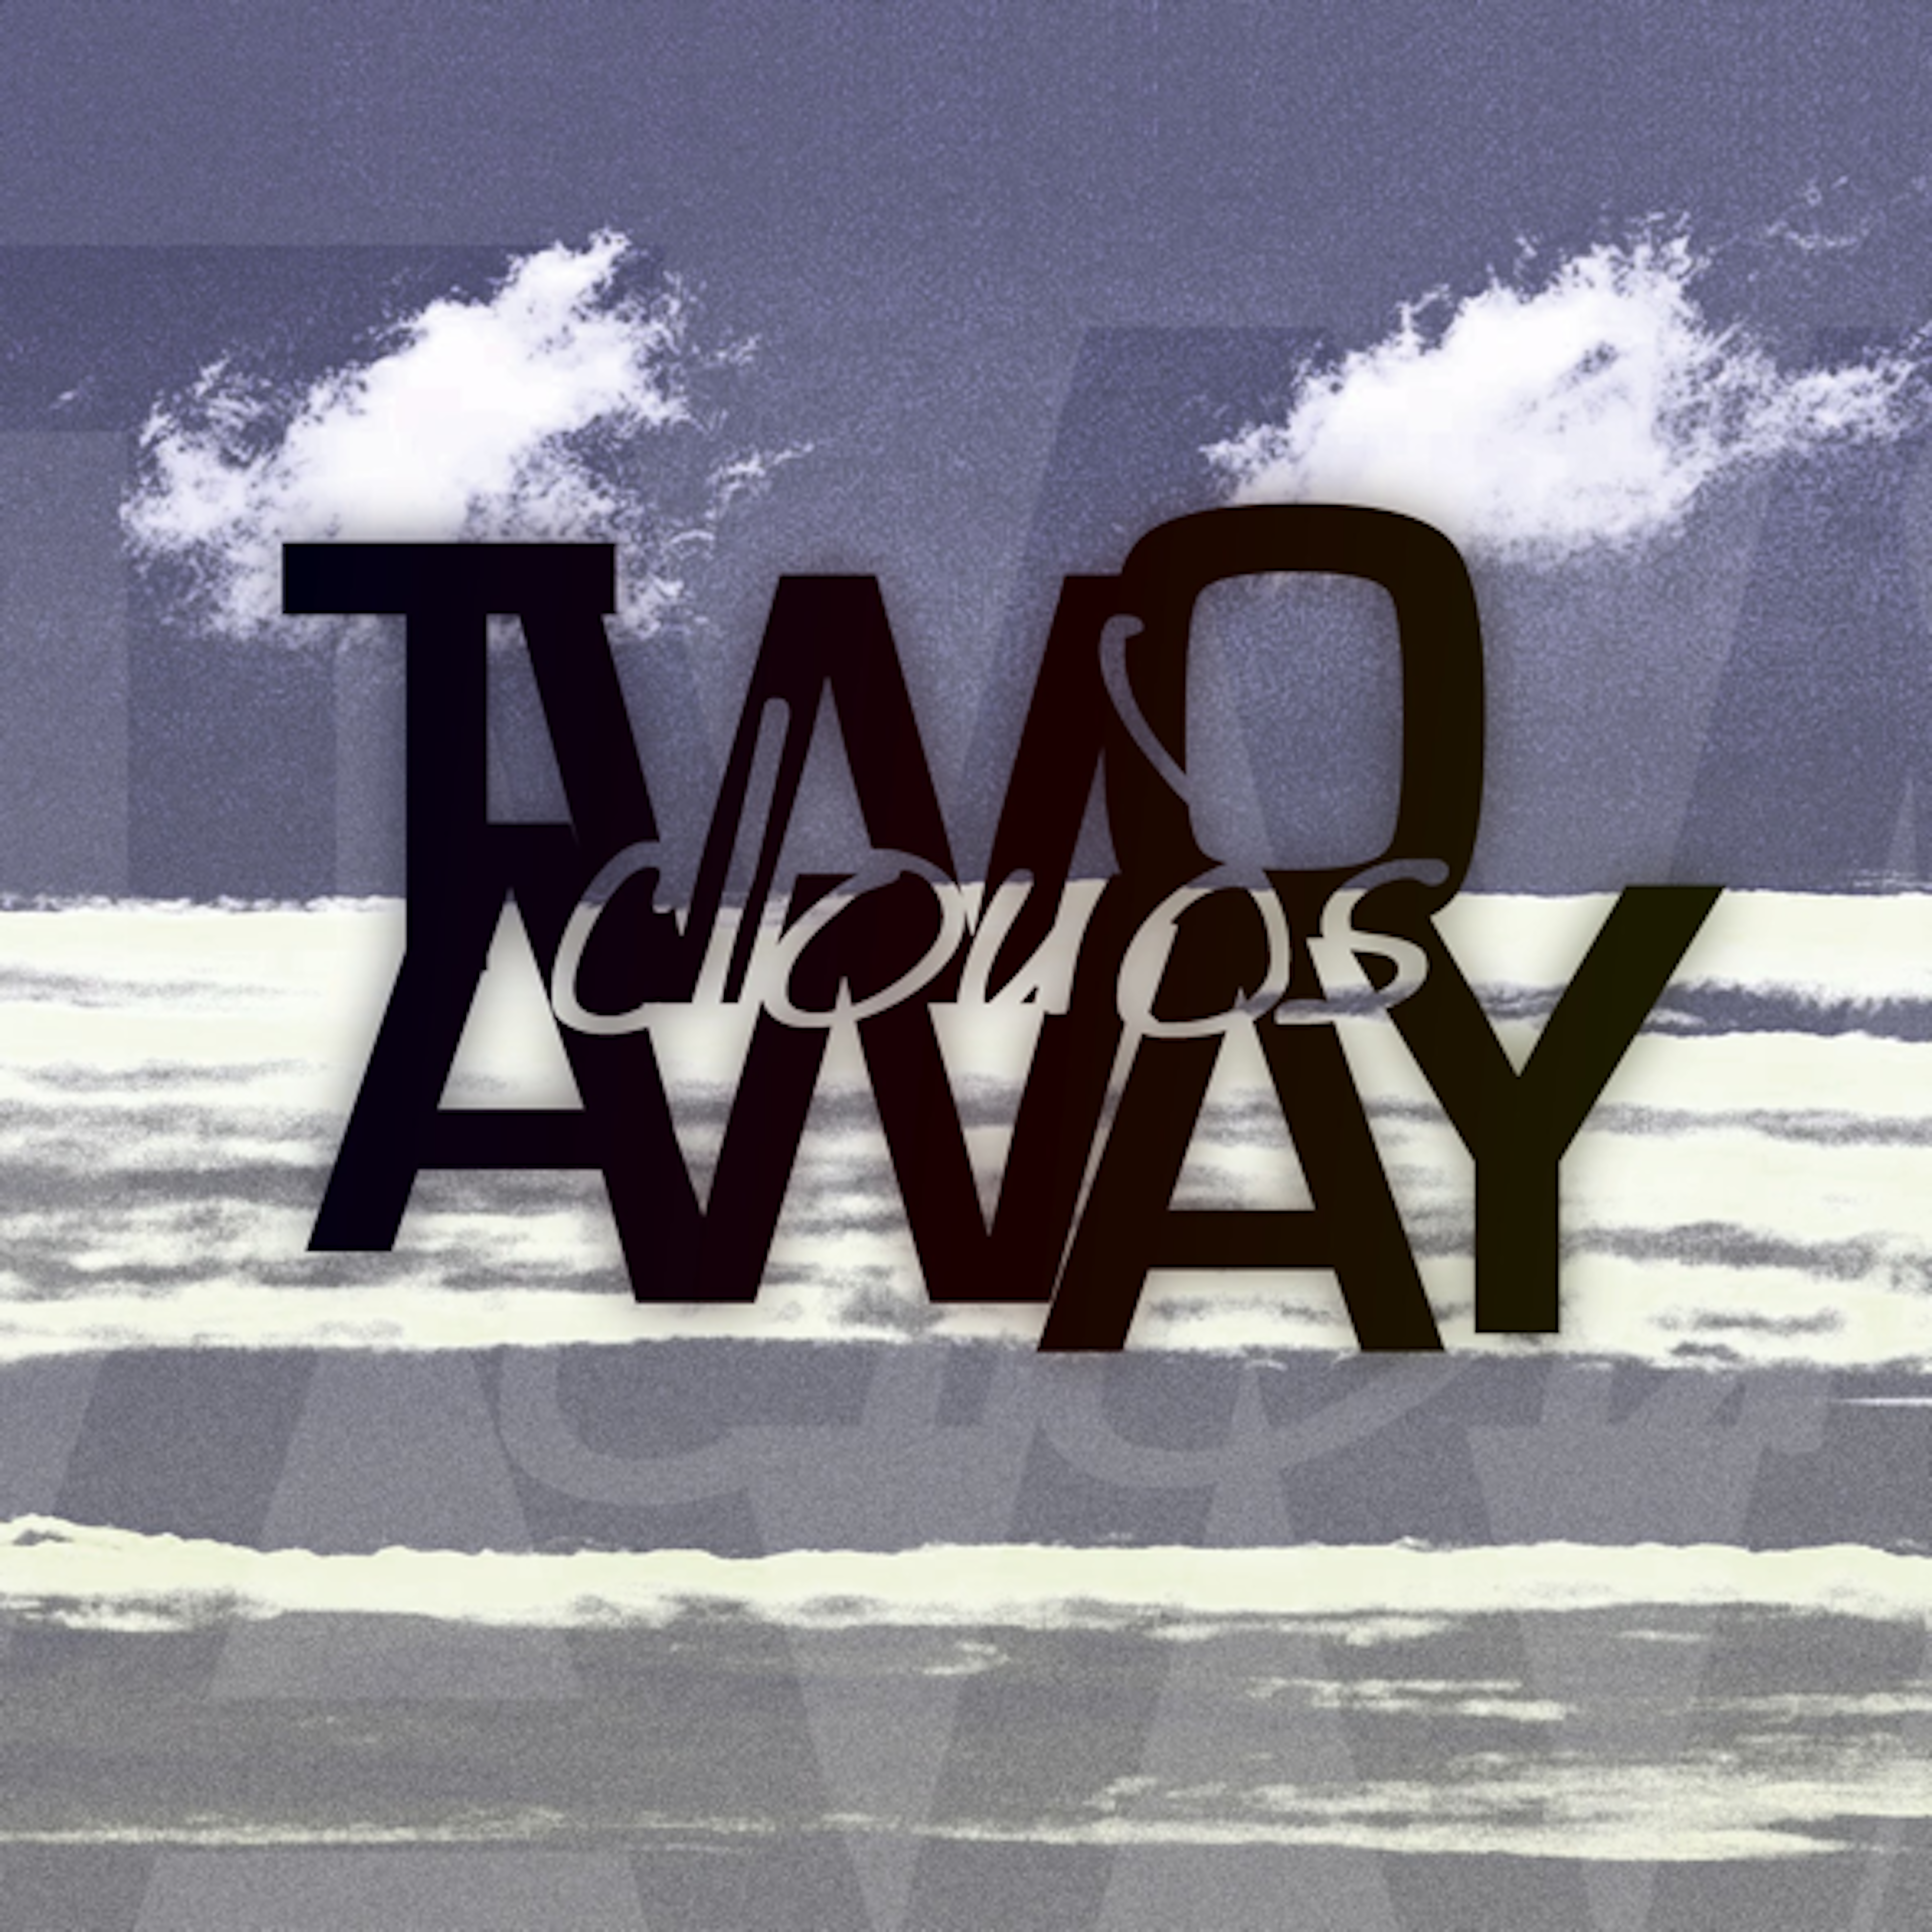 cover for "Two Clouds Away - 09'~10' demos"